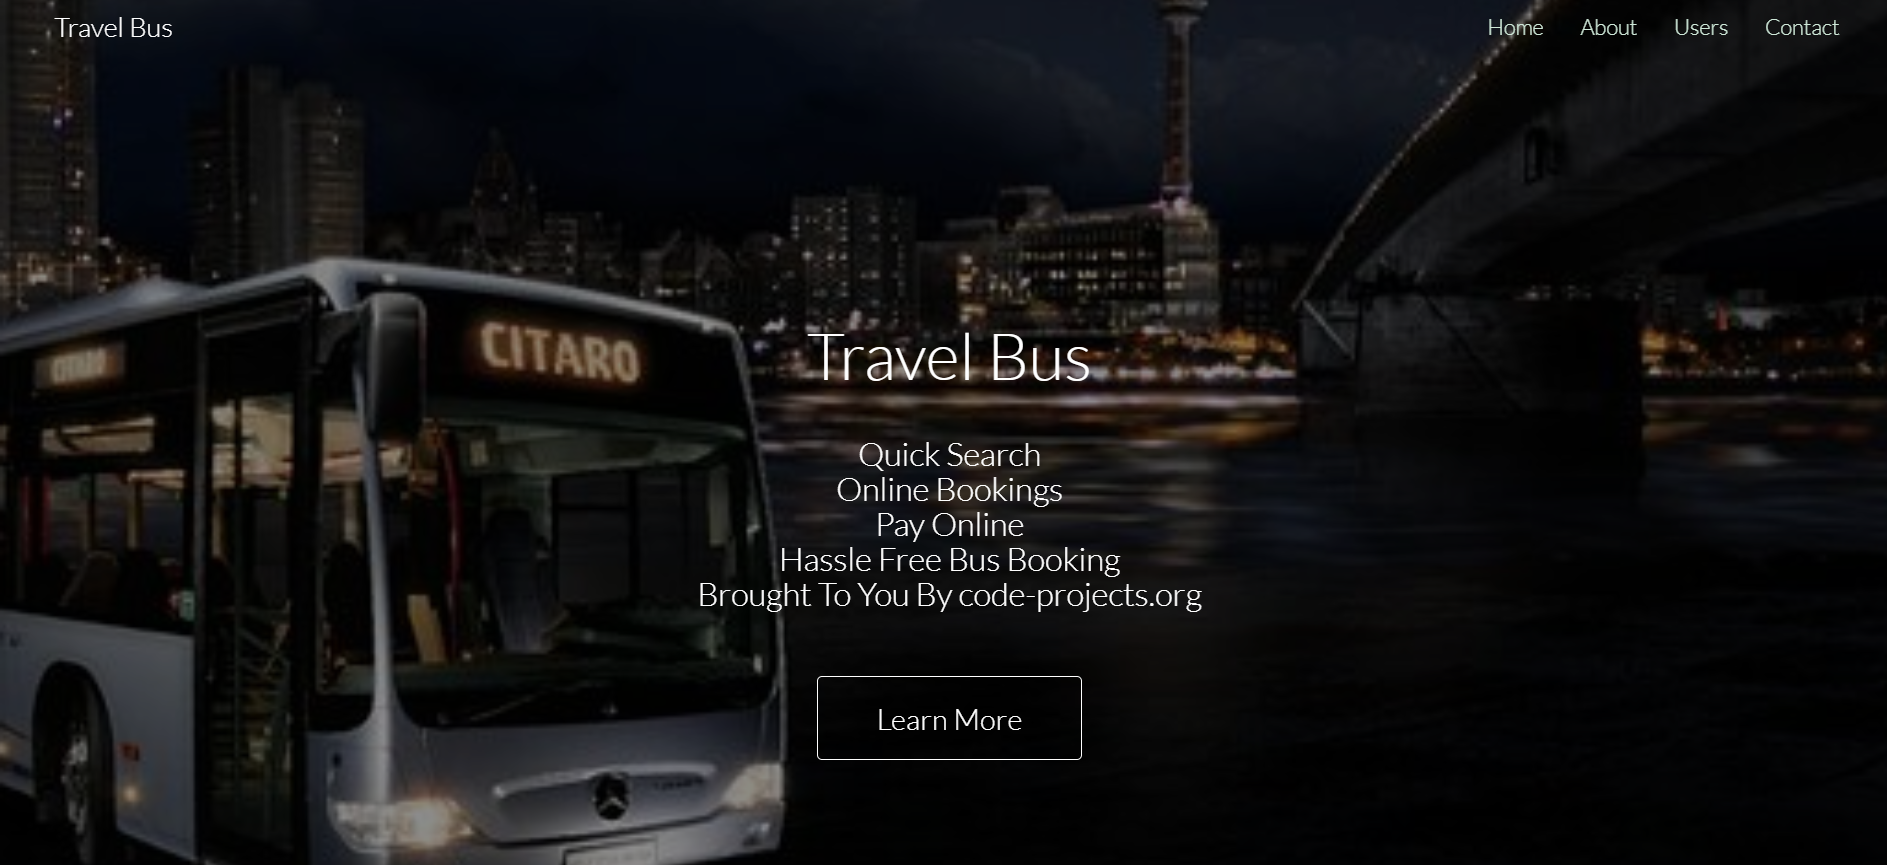 Travel Bus Booking System - CN7026 Cloud Computing Assignment